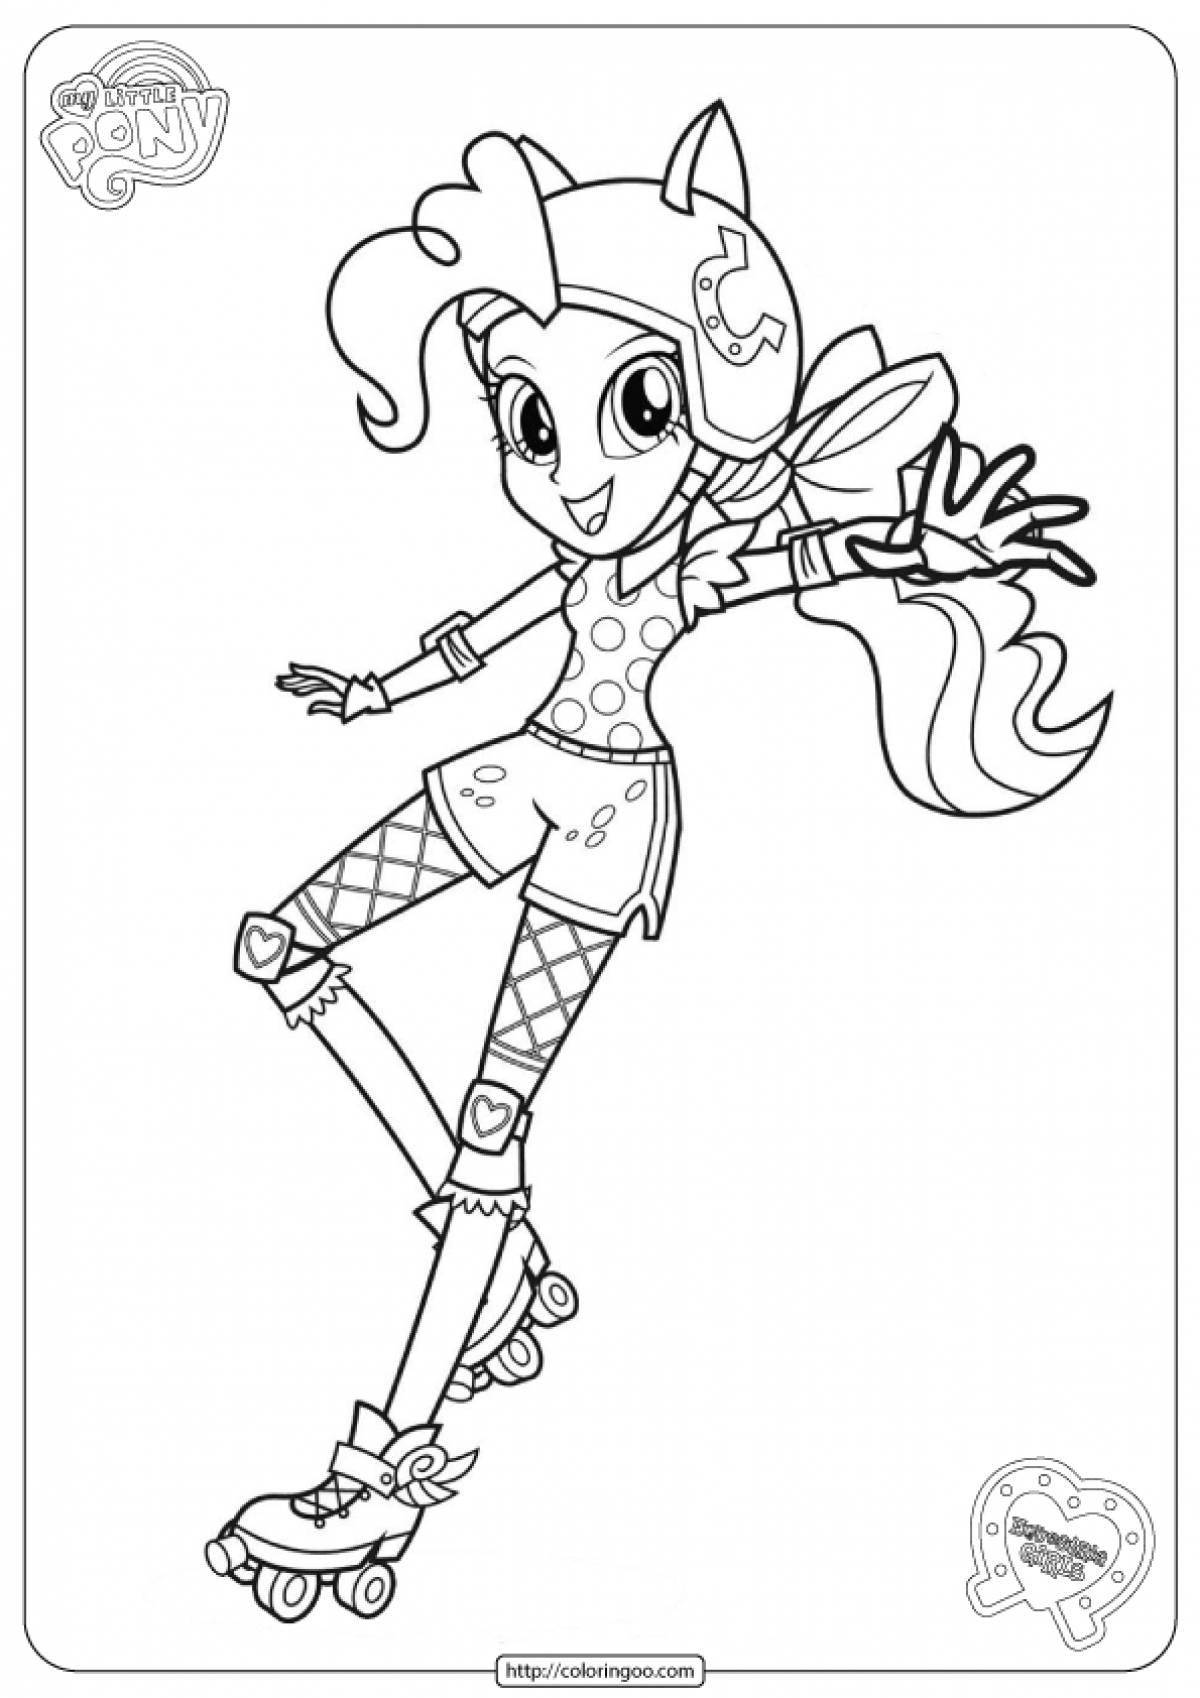 My little pony equestria girls live coloring